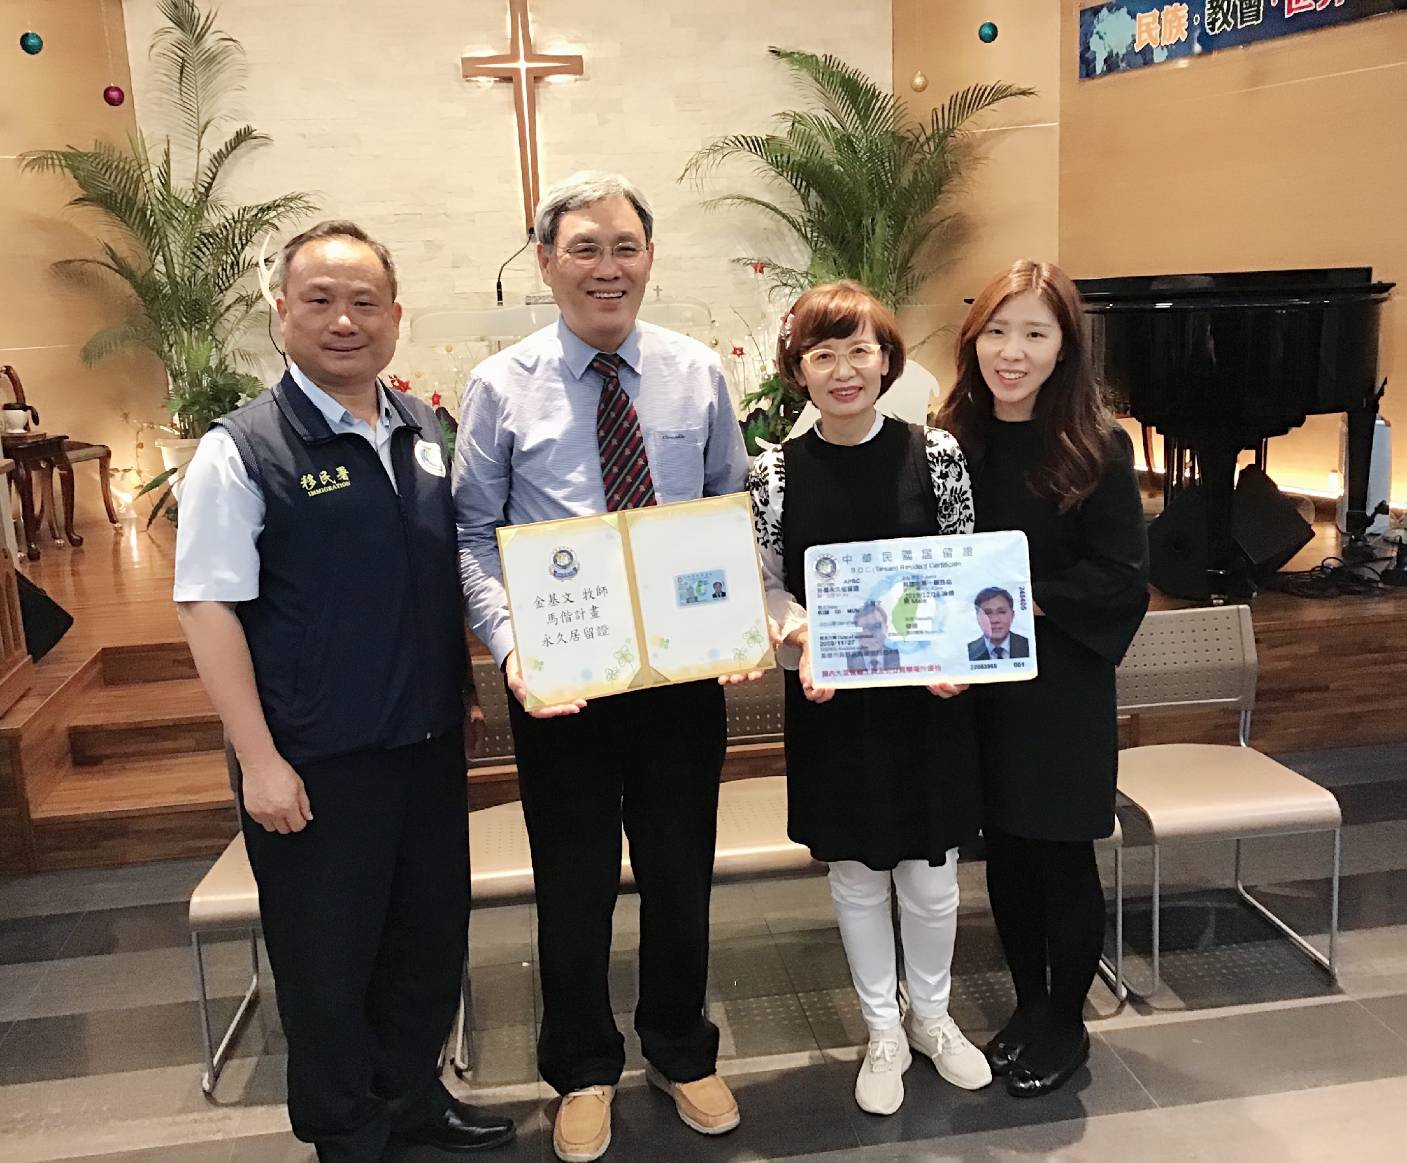 Priest Kim has been devoting to the missionary work in Taiwan for 34 years and is awarded by Mackay Project with the